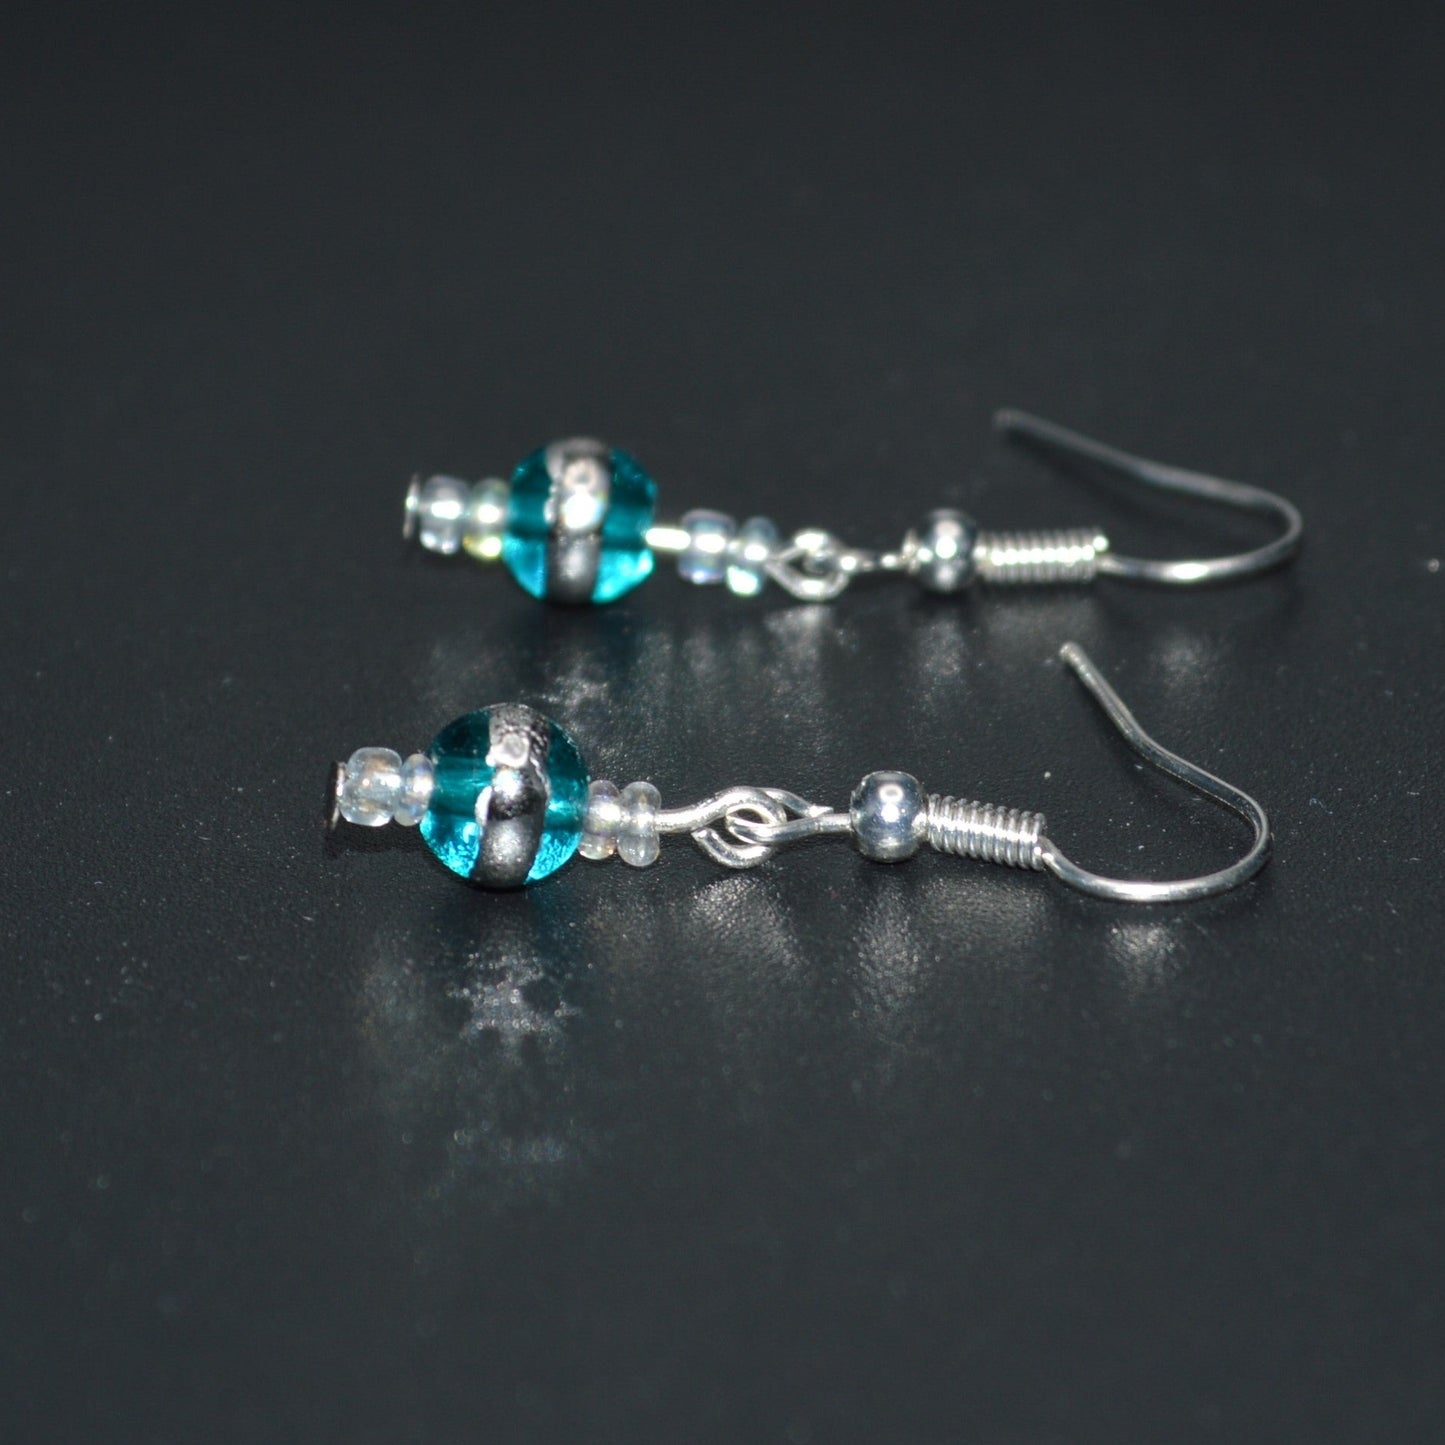 Aqua with a Silver Stripe and Seed Bead Earrings